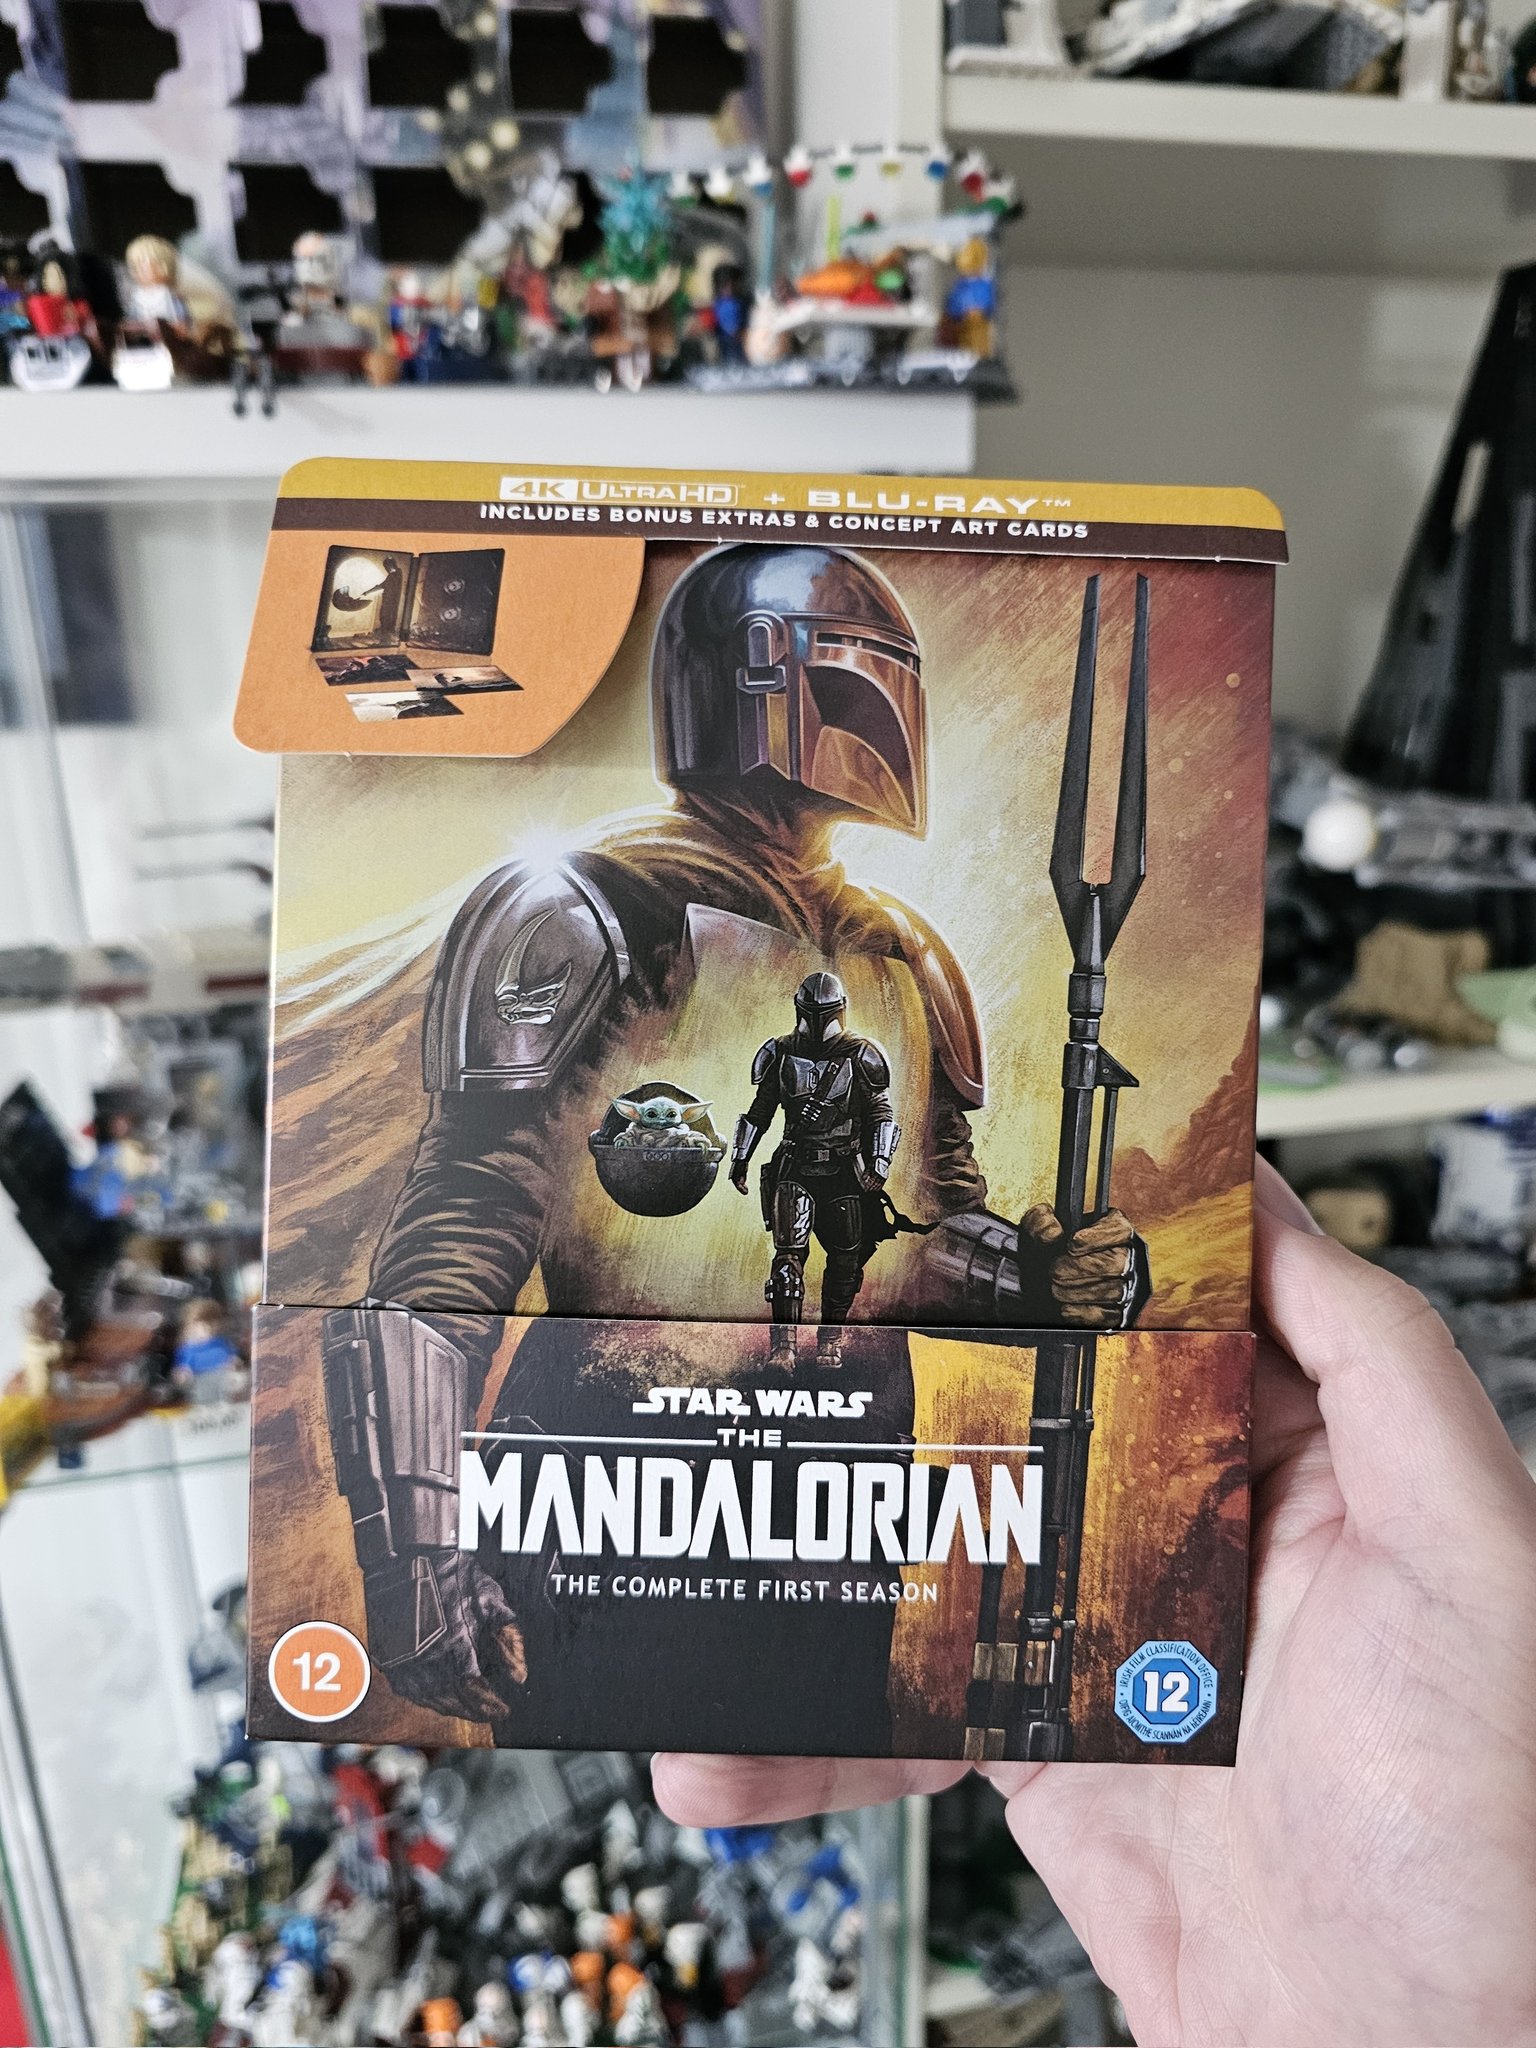 AZZATRU on X: Managed to get The Mandalorian Season 1 and 2 Blu-Ray at a  good discount already despite them only just releasing/pre-order.  Hopefully, Book of Boba, Obi-Wan and Andor get a